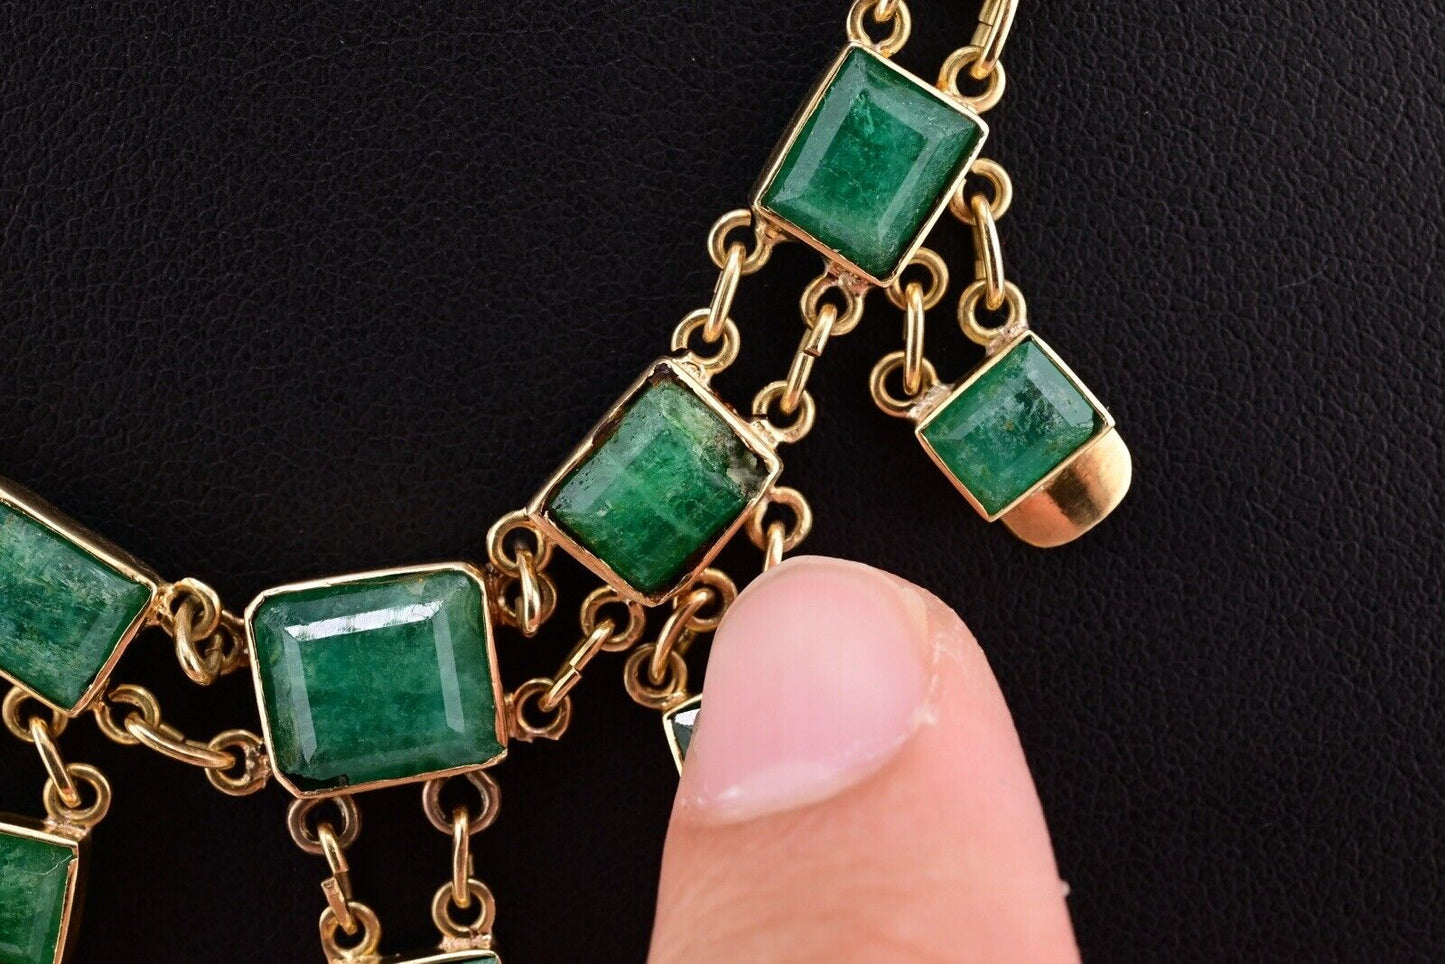 Majestic 14K Yellow Gold & Emerald Necklace 31.74 Grams